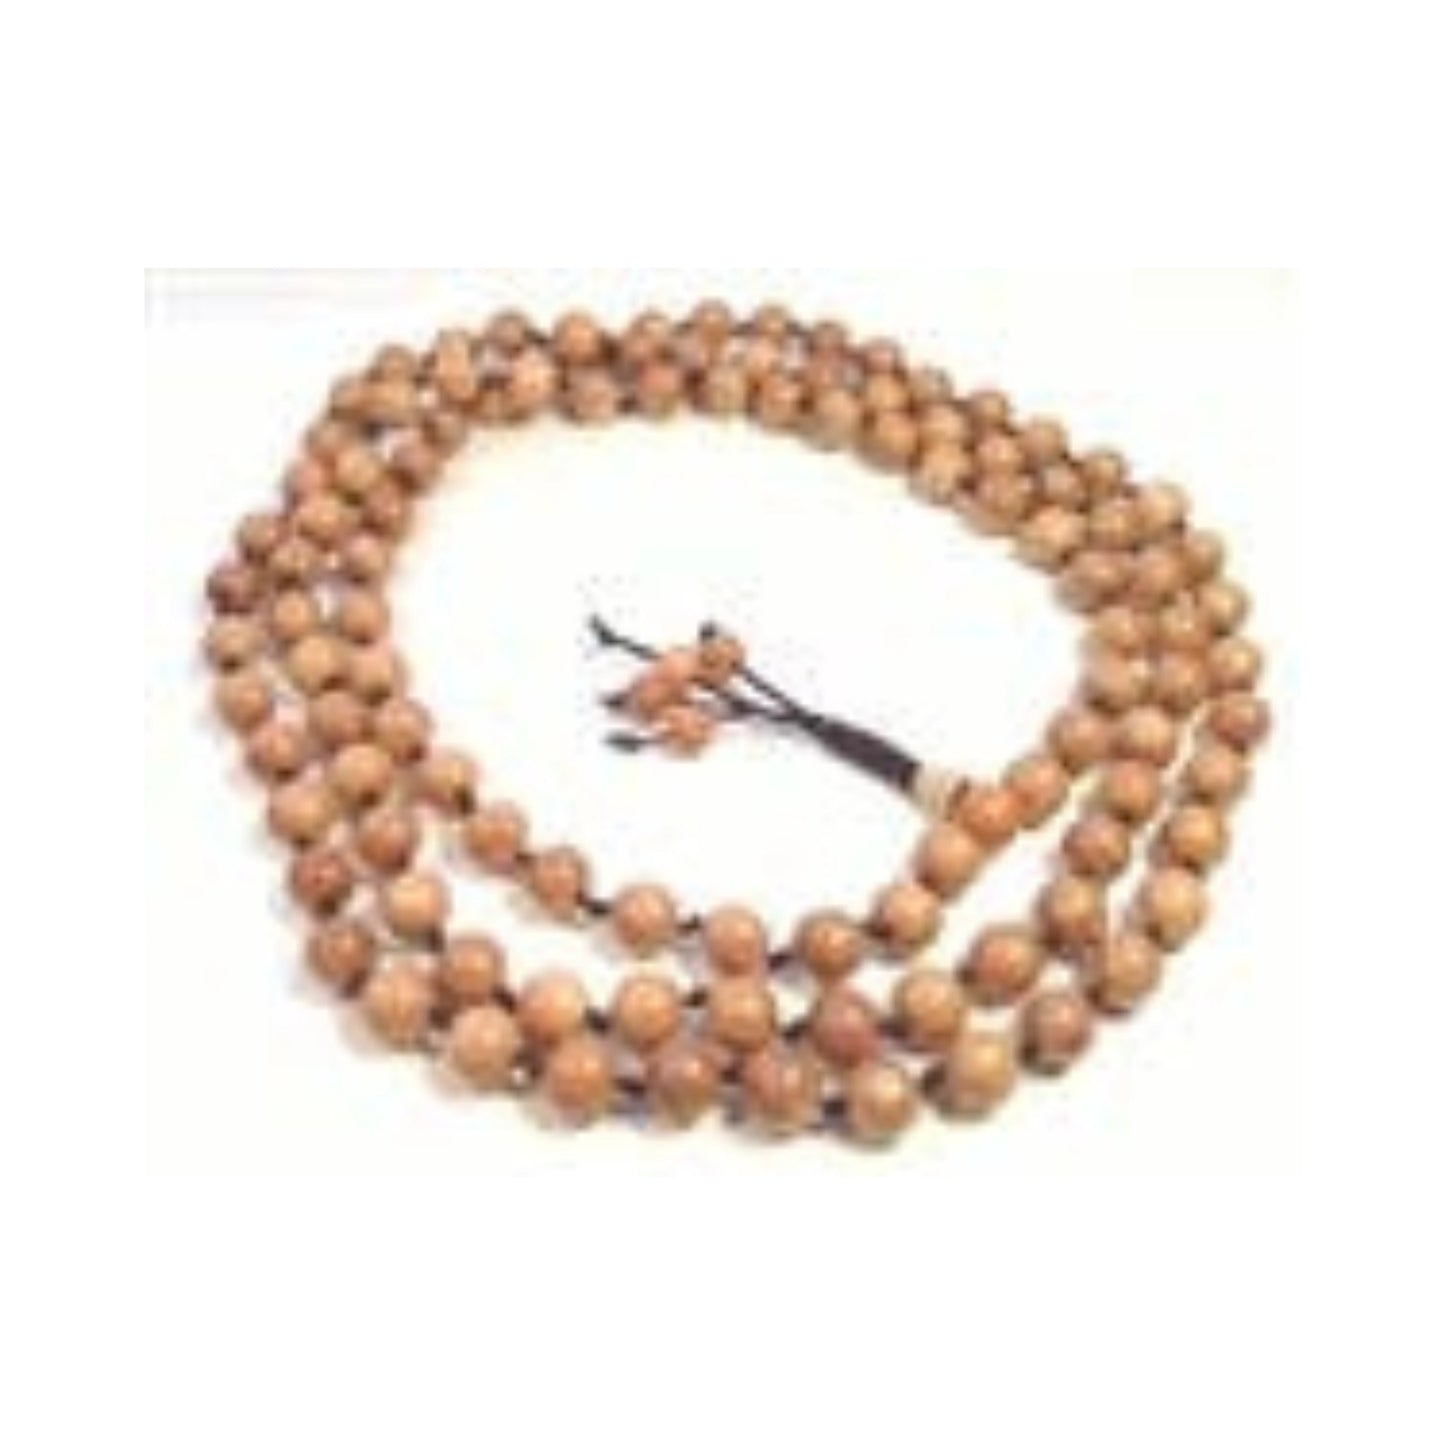 Sustainably Grown Knotted Yew Wood 108 Bead Mala - 8mm (1 Pack)